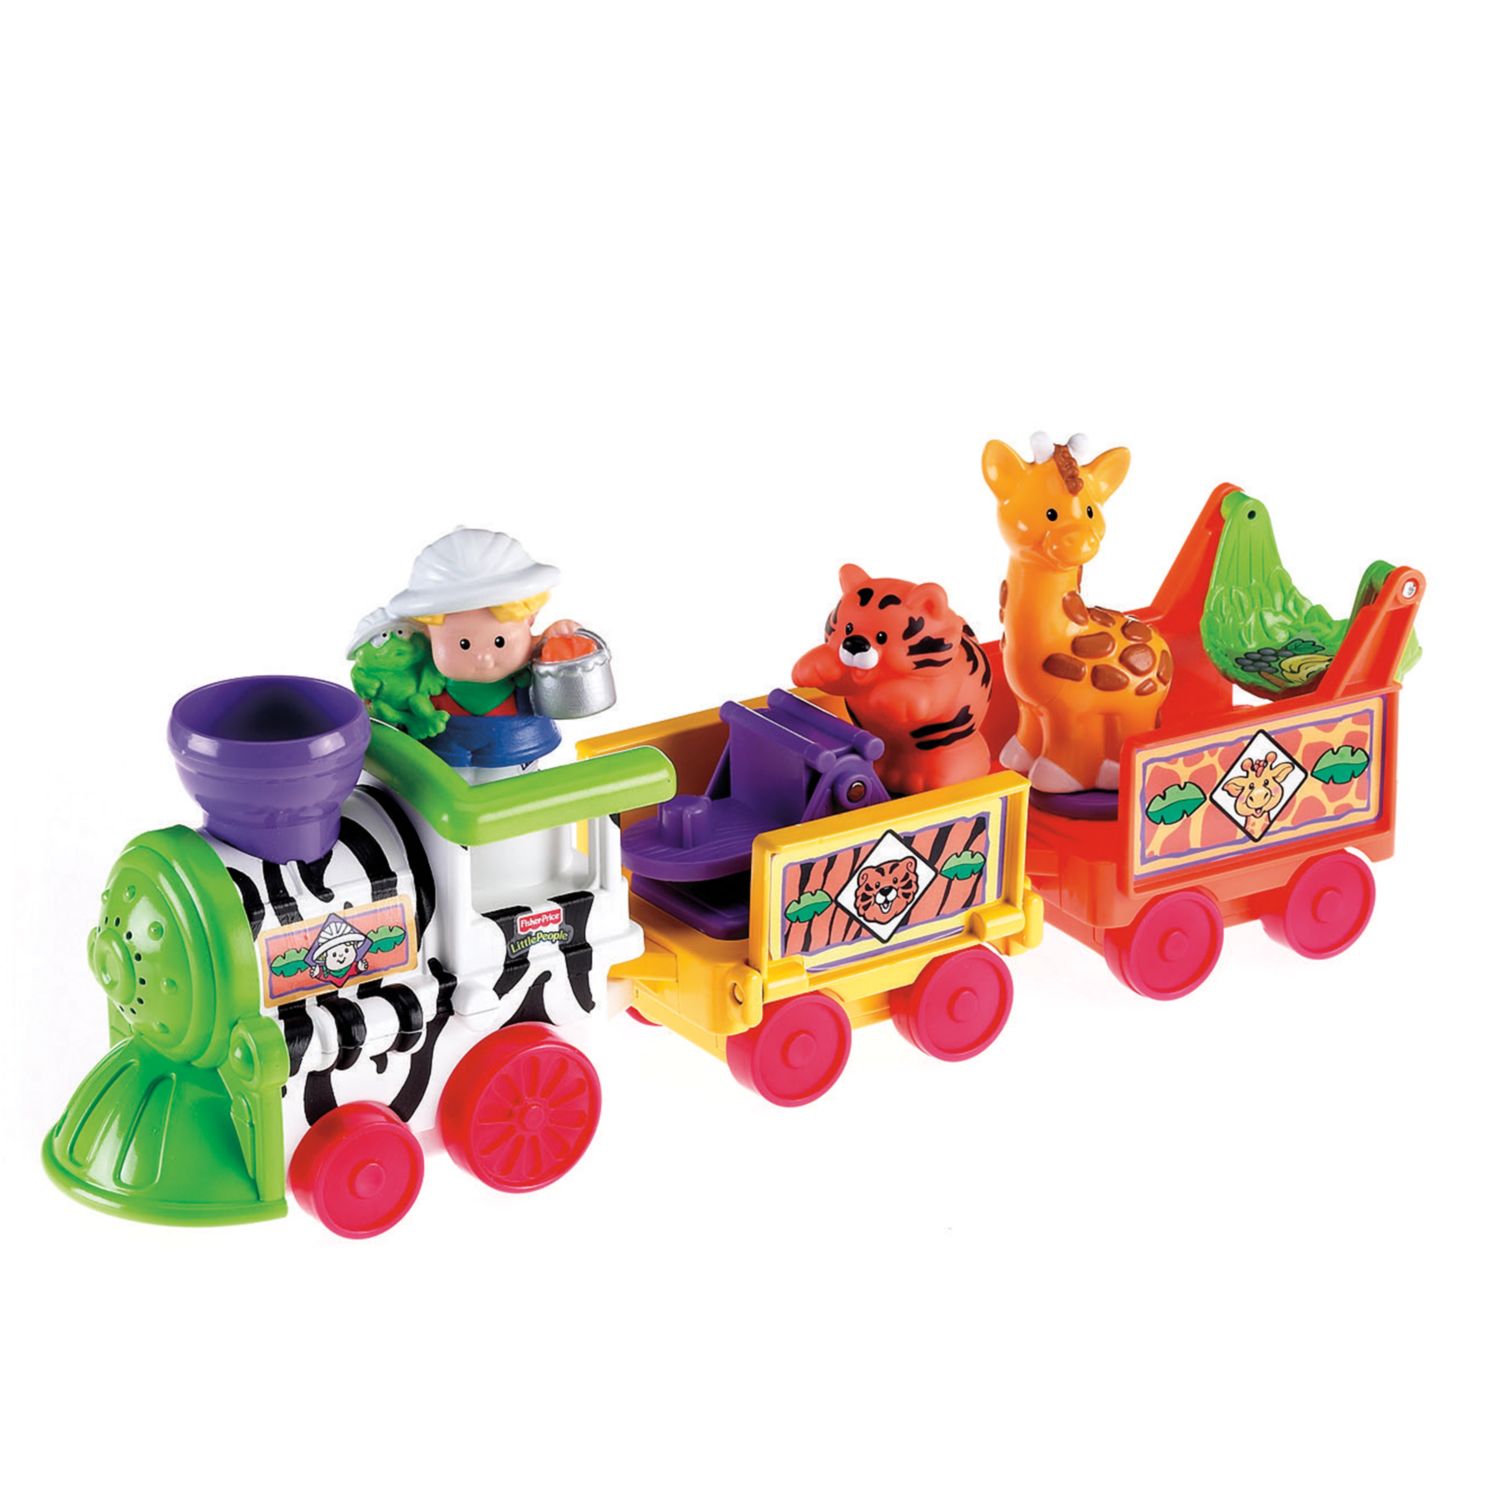 fisher price little people musical train